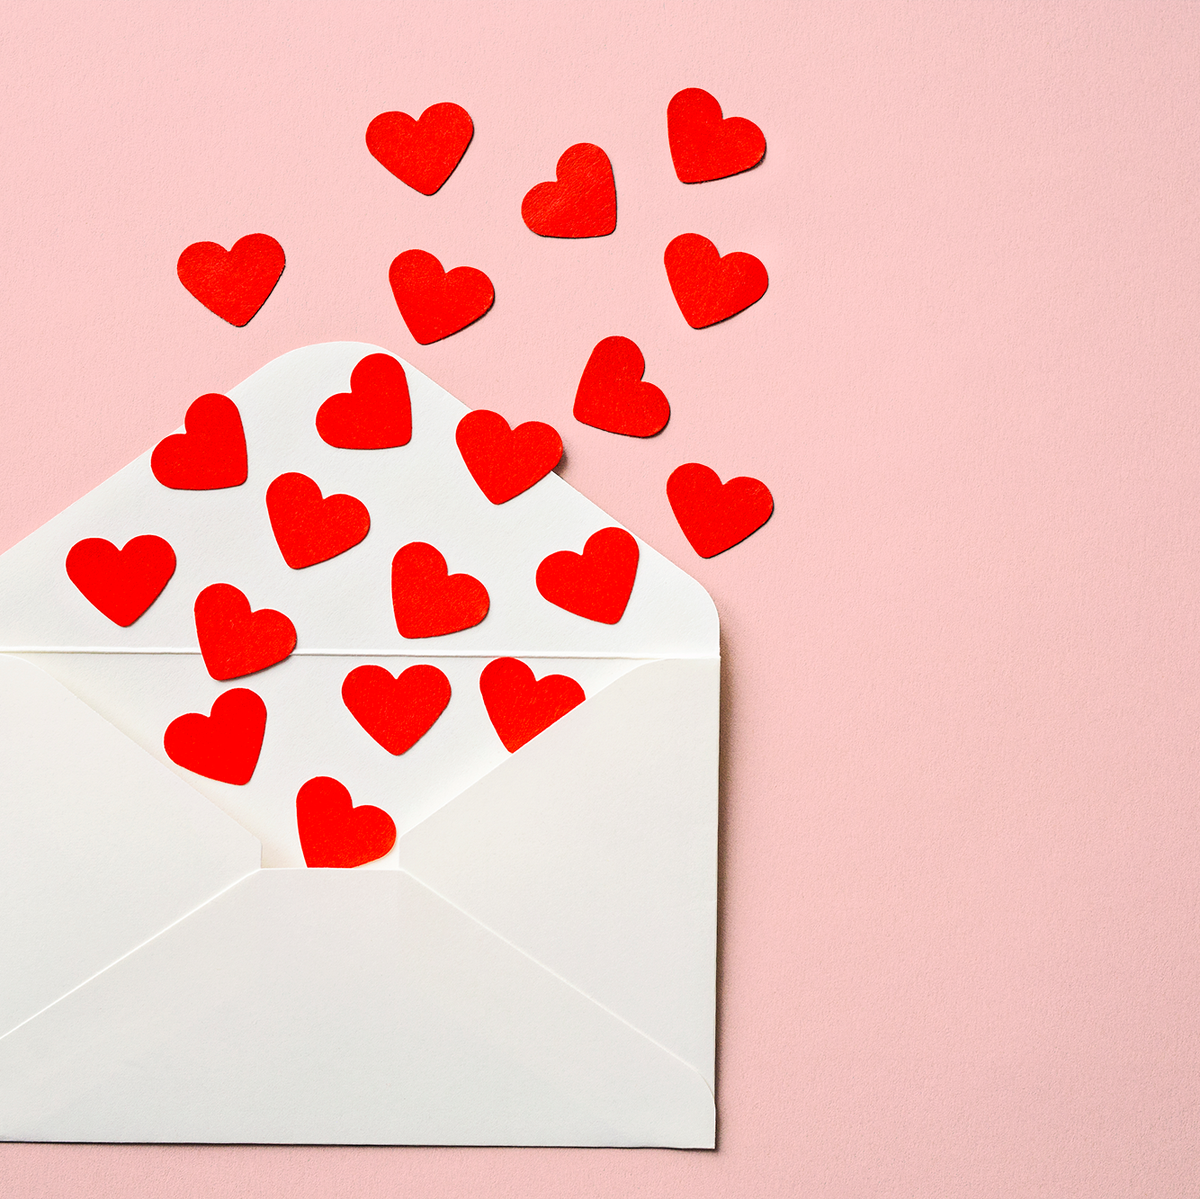 How to Write a Love Letter - Love Letter Ideas and Inspiration